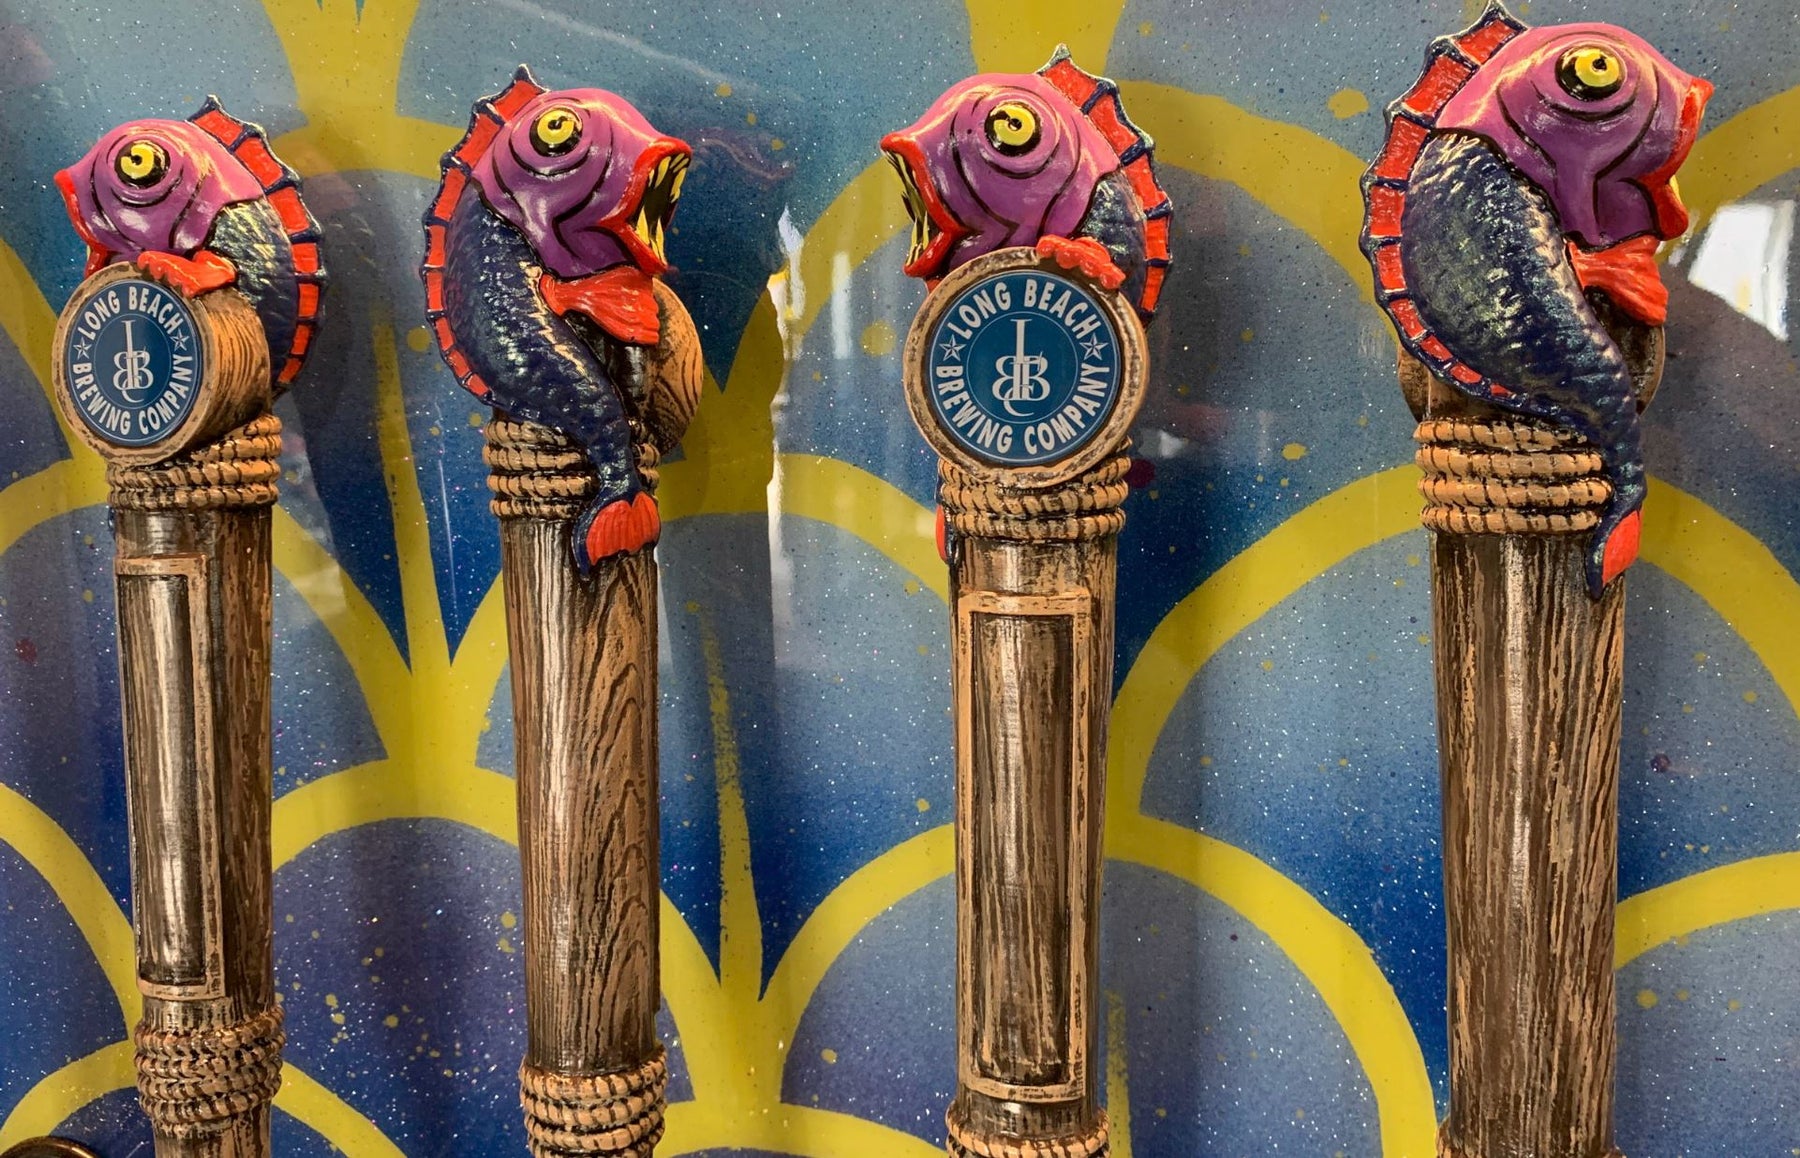 What You Should Know about Common Beer Tap Handles